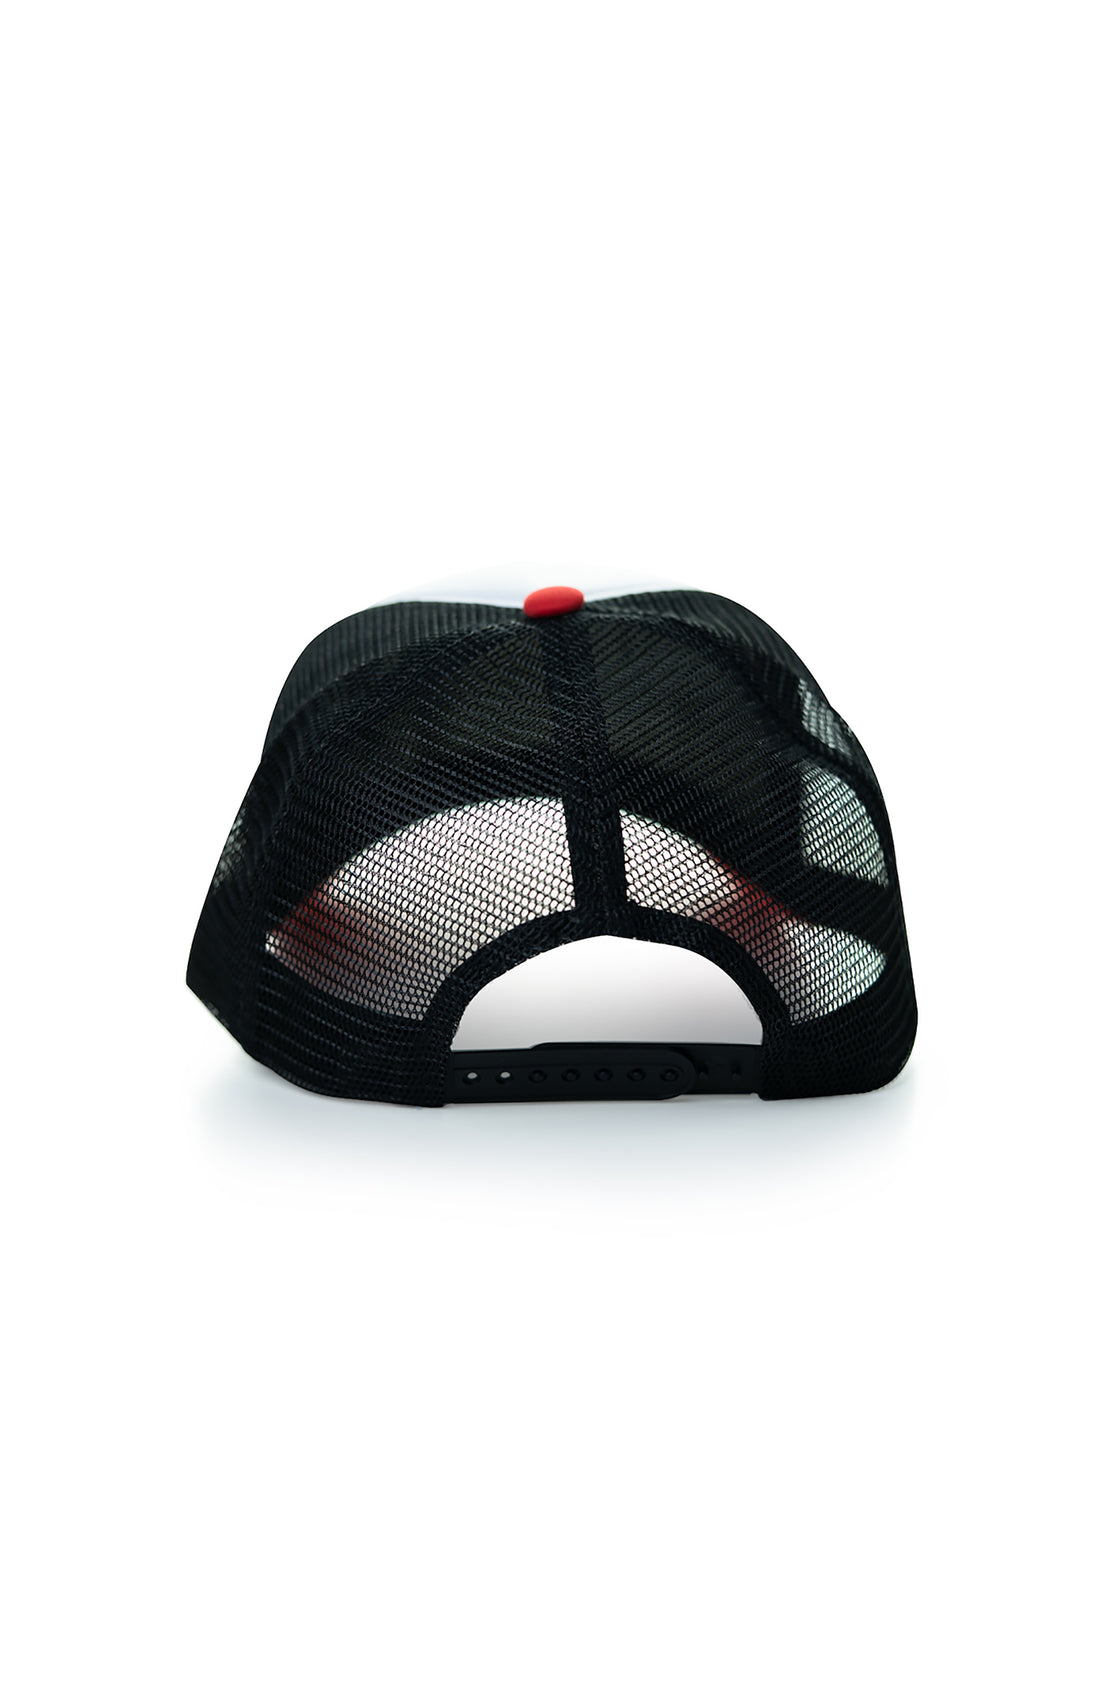 A sleek and stylish trucker hat with bold black graphic print. Expertly crafted in Portugal with high-quality materials for durability. Easy to maintain, simply machine wash and hang to dry. Elevate your fashion game with this unique and fashionable accessory.